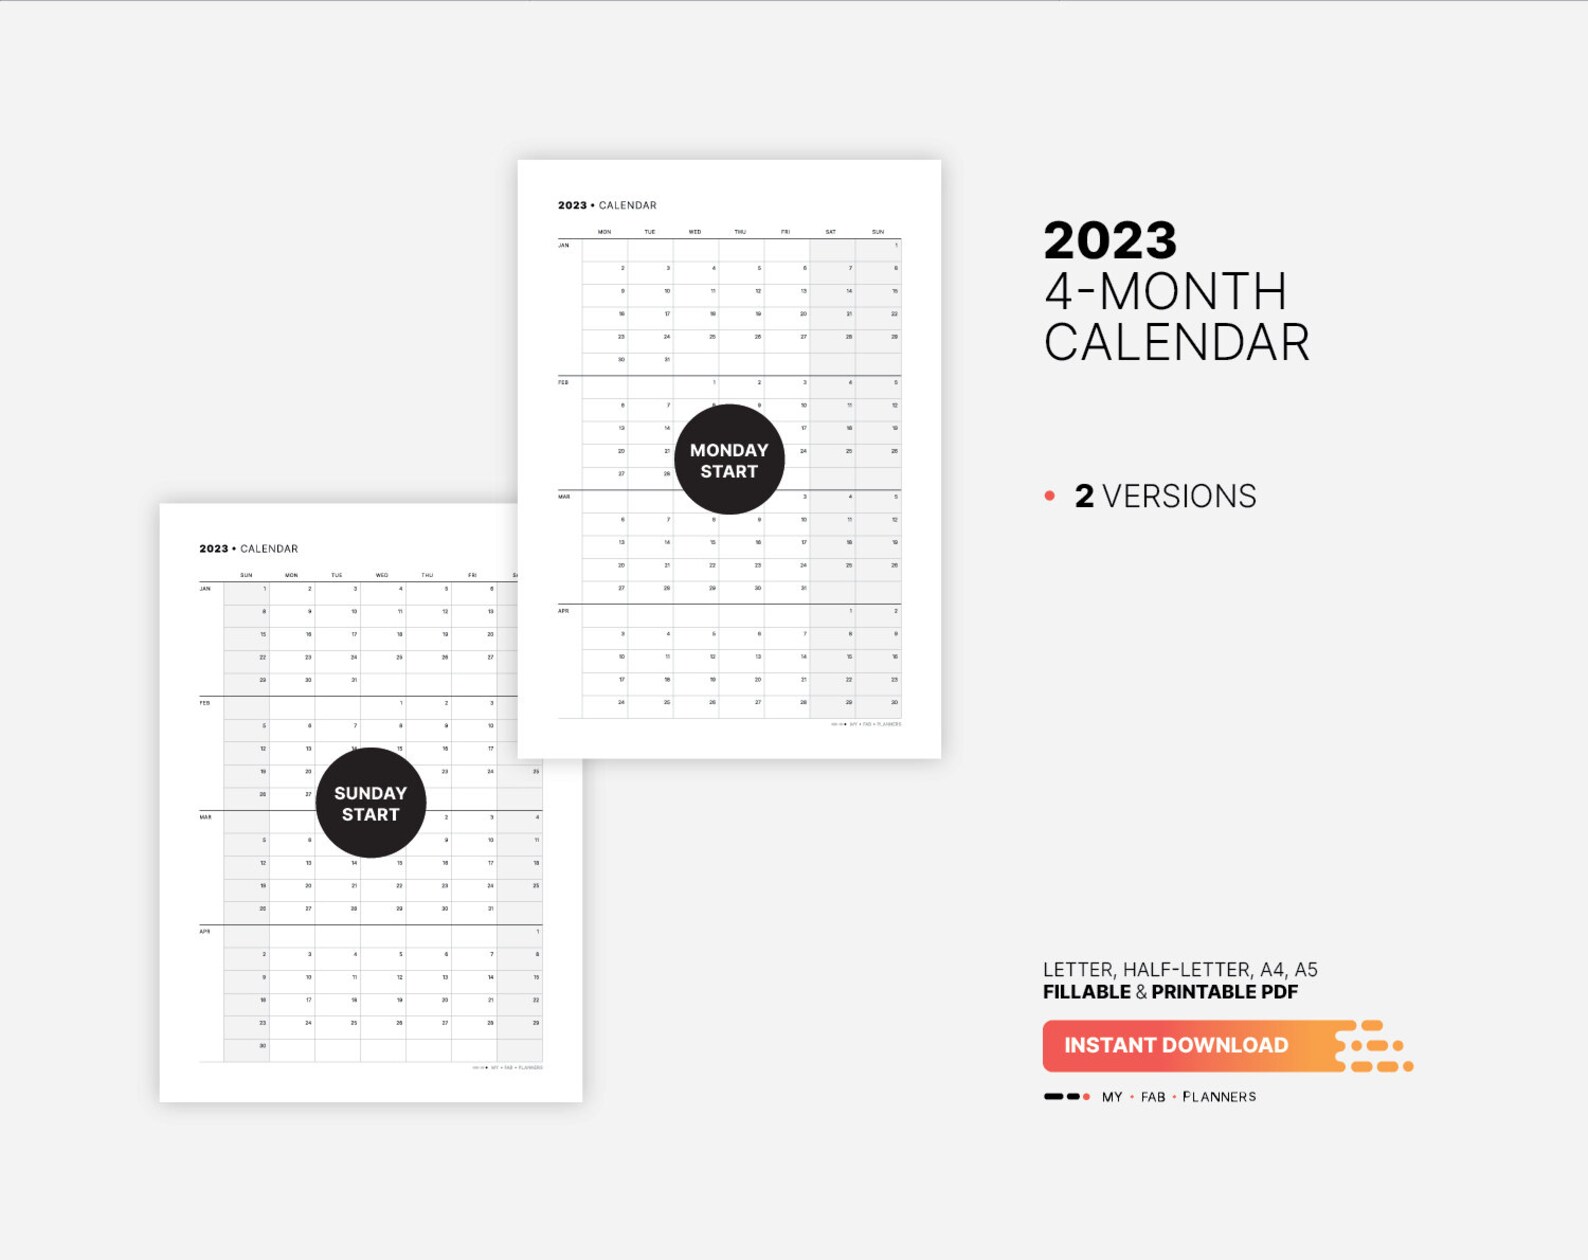 2023-4-month-calendar-fillable-planner-template-yearly-etsy